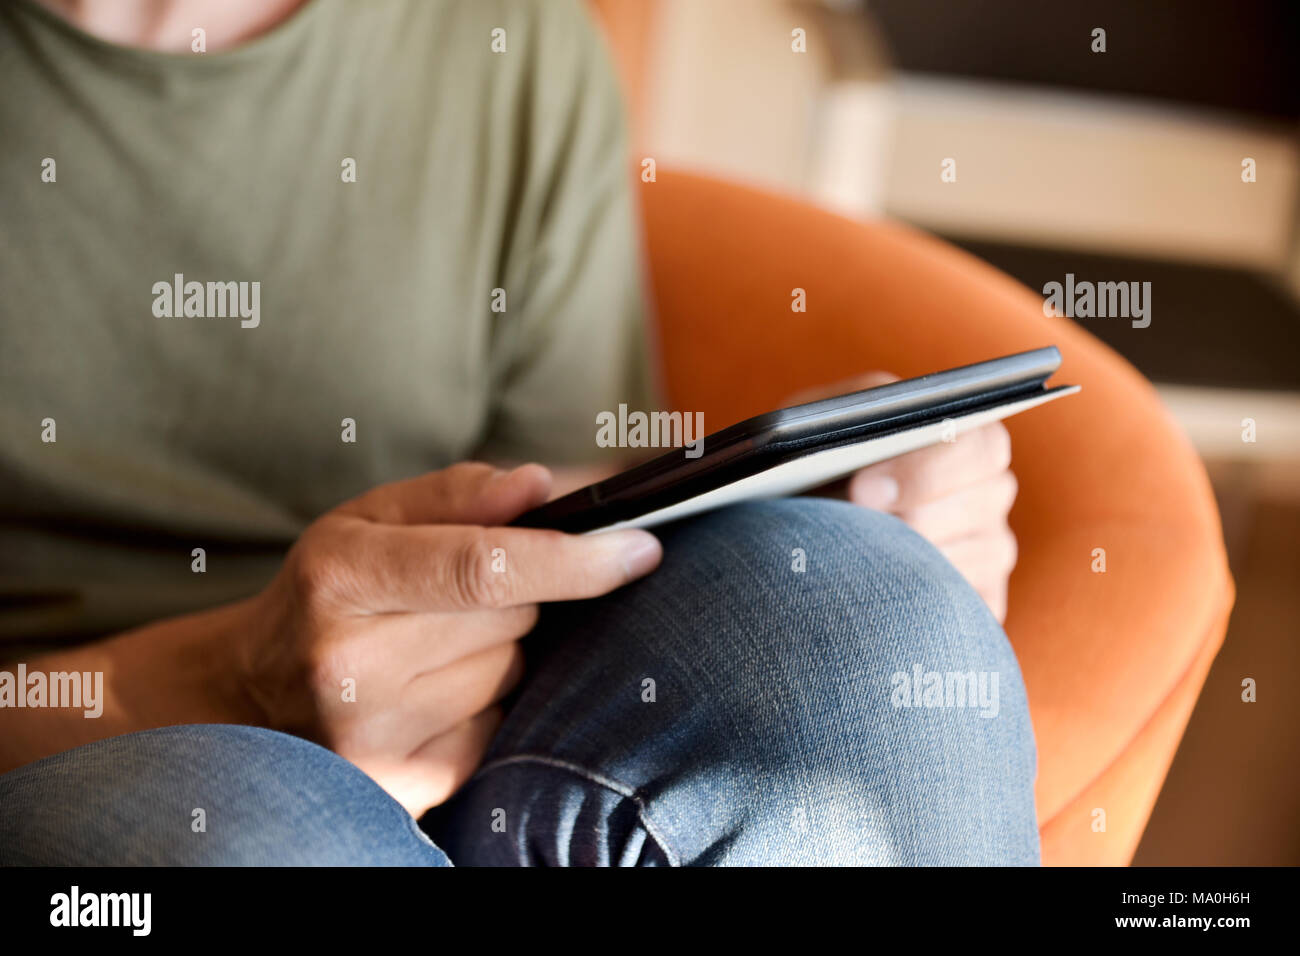 closeup of a young caucasian, wearing jeans and a green t-shirt, using a tablet sitting in a comfortable orange couch indoors Stock Photo